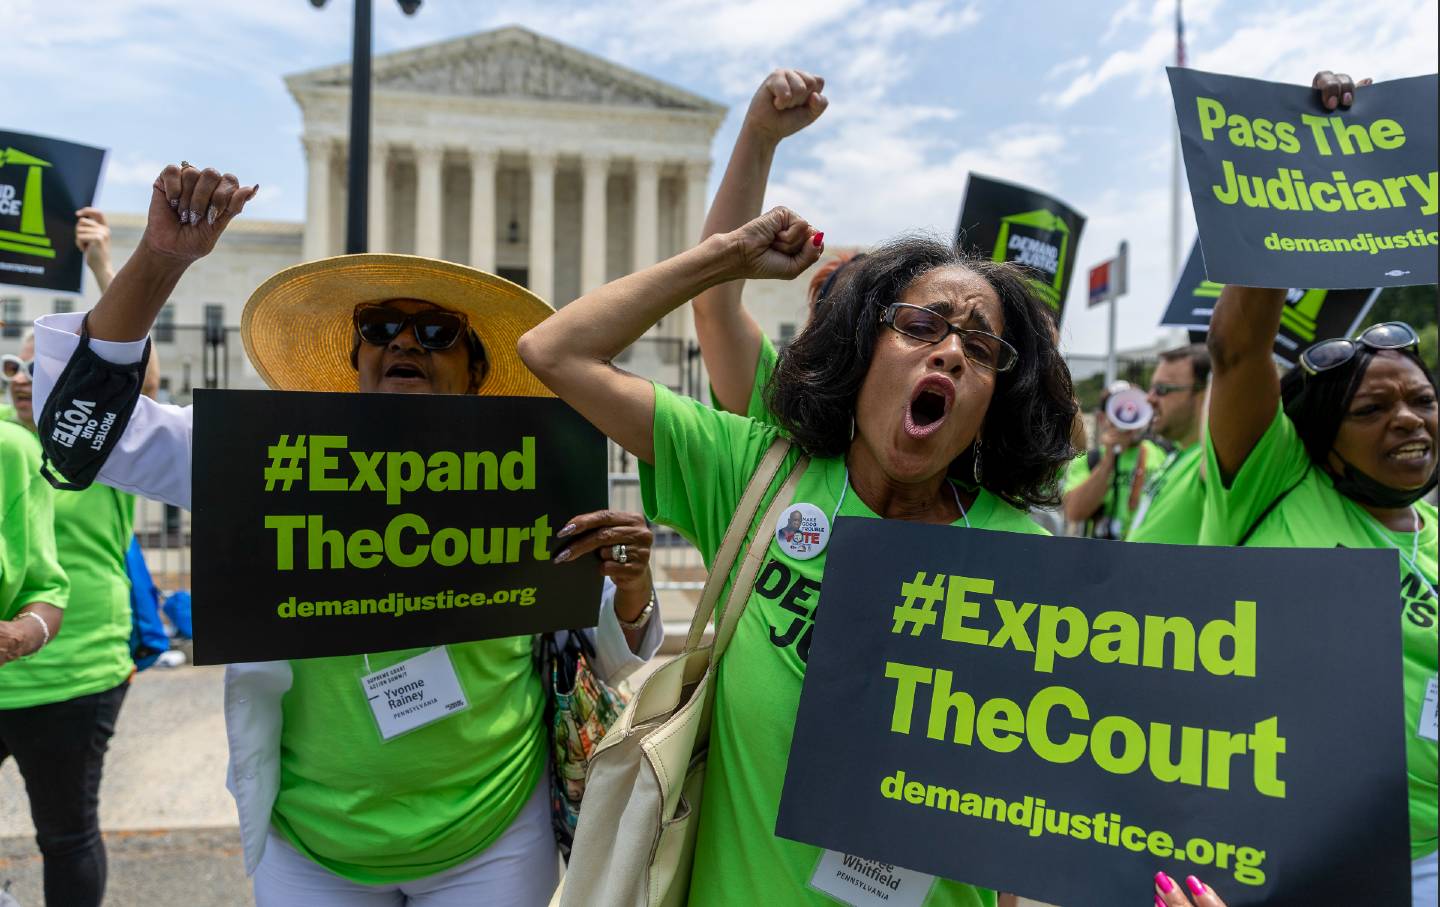 Barack Obama Is Wrong to Oppose Expanding the Supreme Court